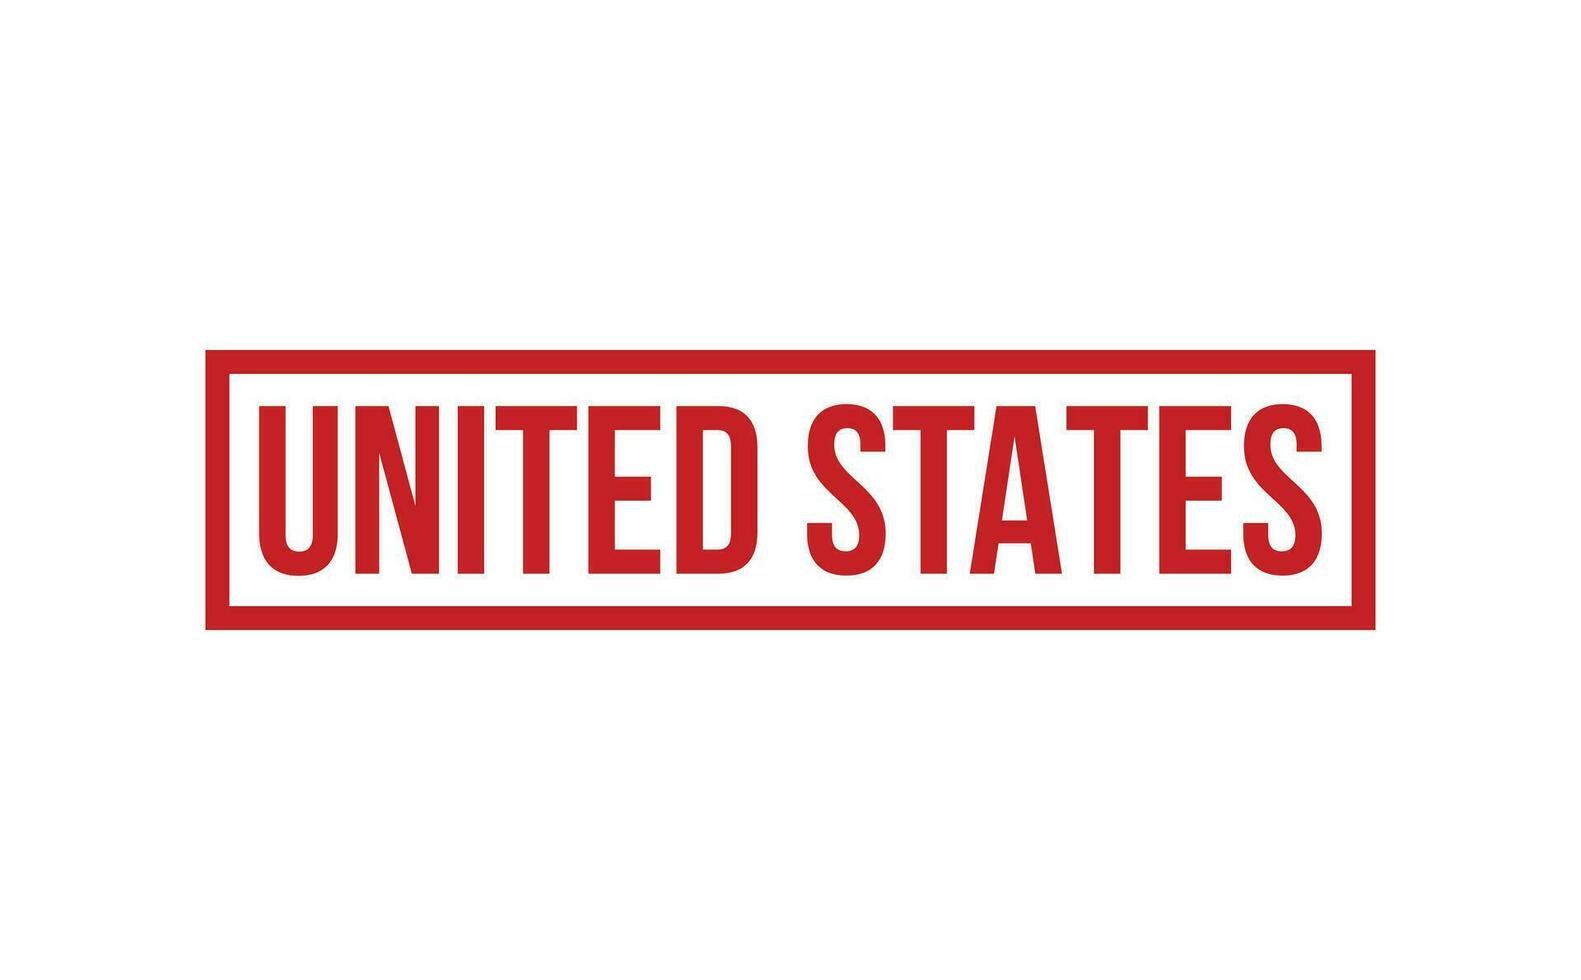 United States Rubber Stamp Seal Vector